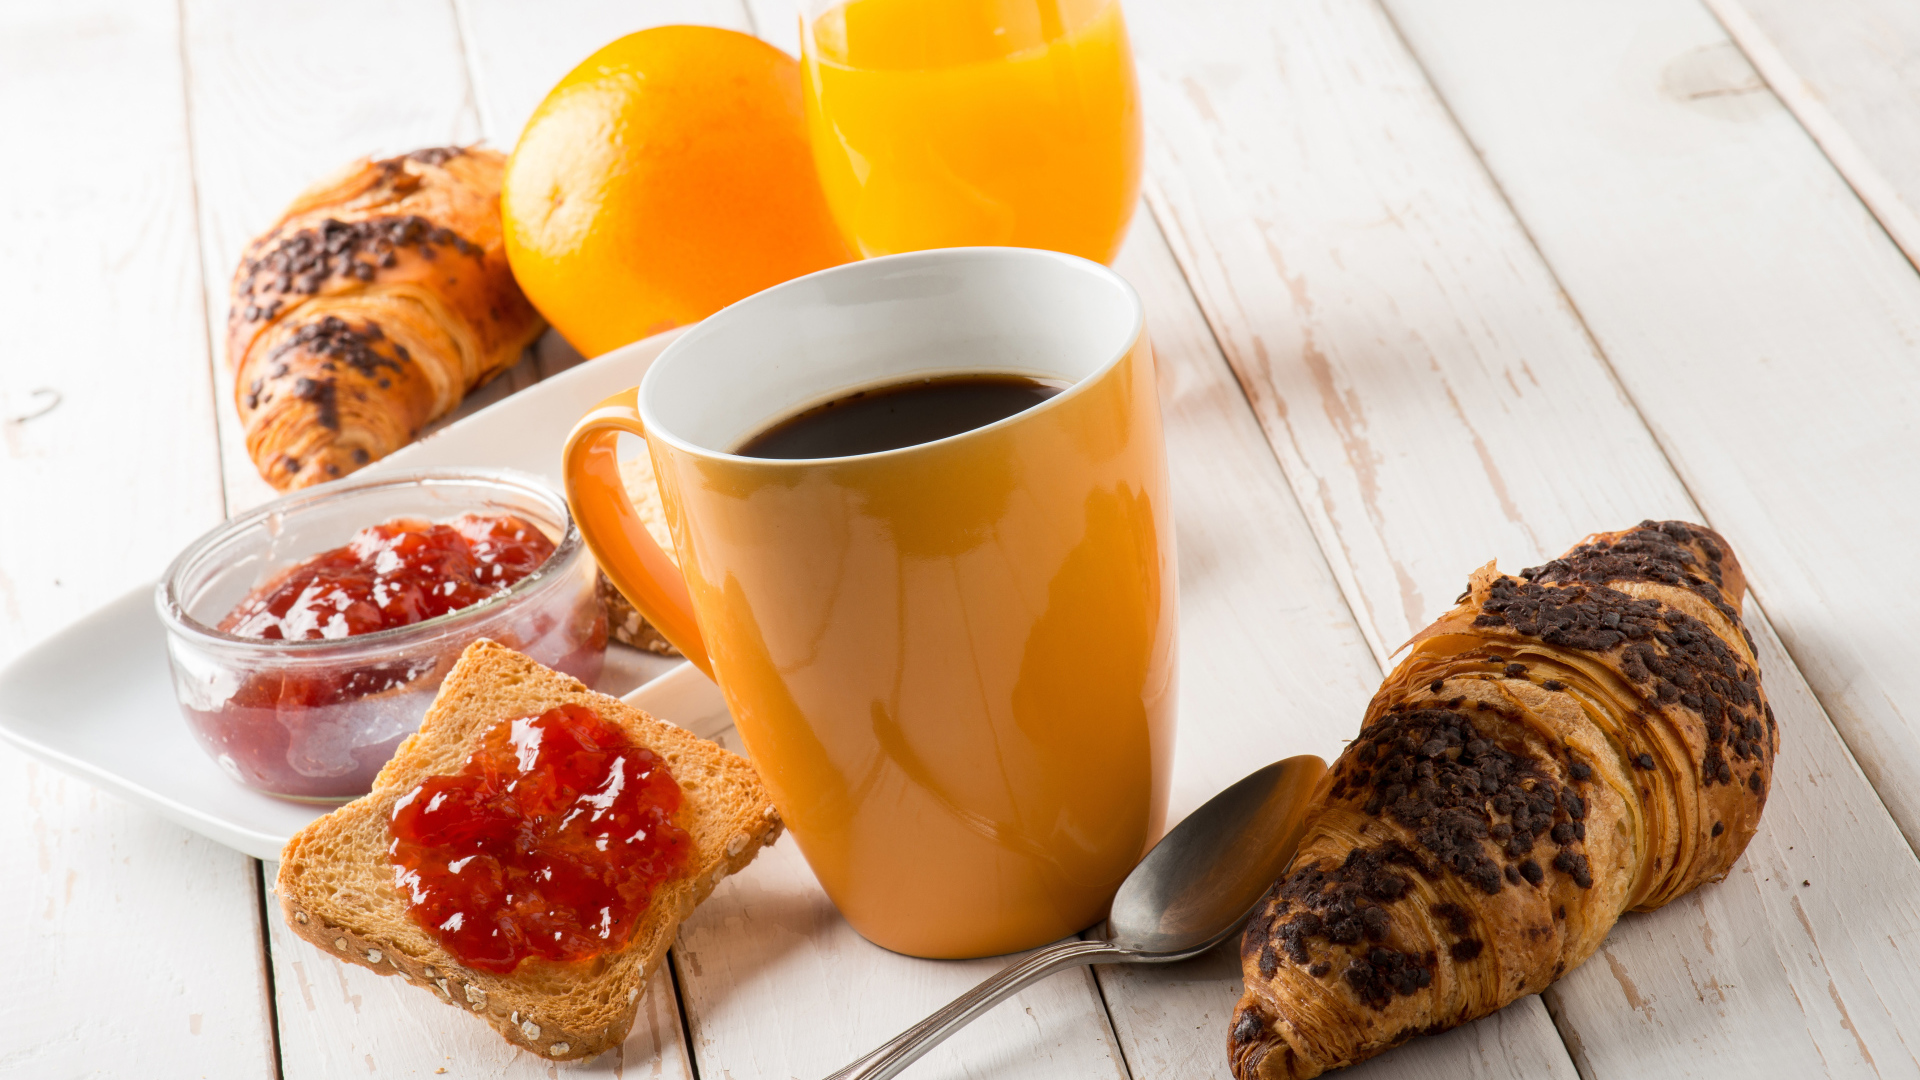 Coffee on a wooden table with croissants, juice and jam